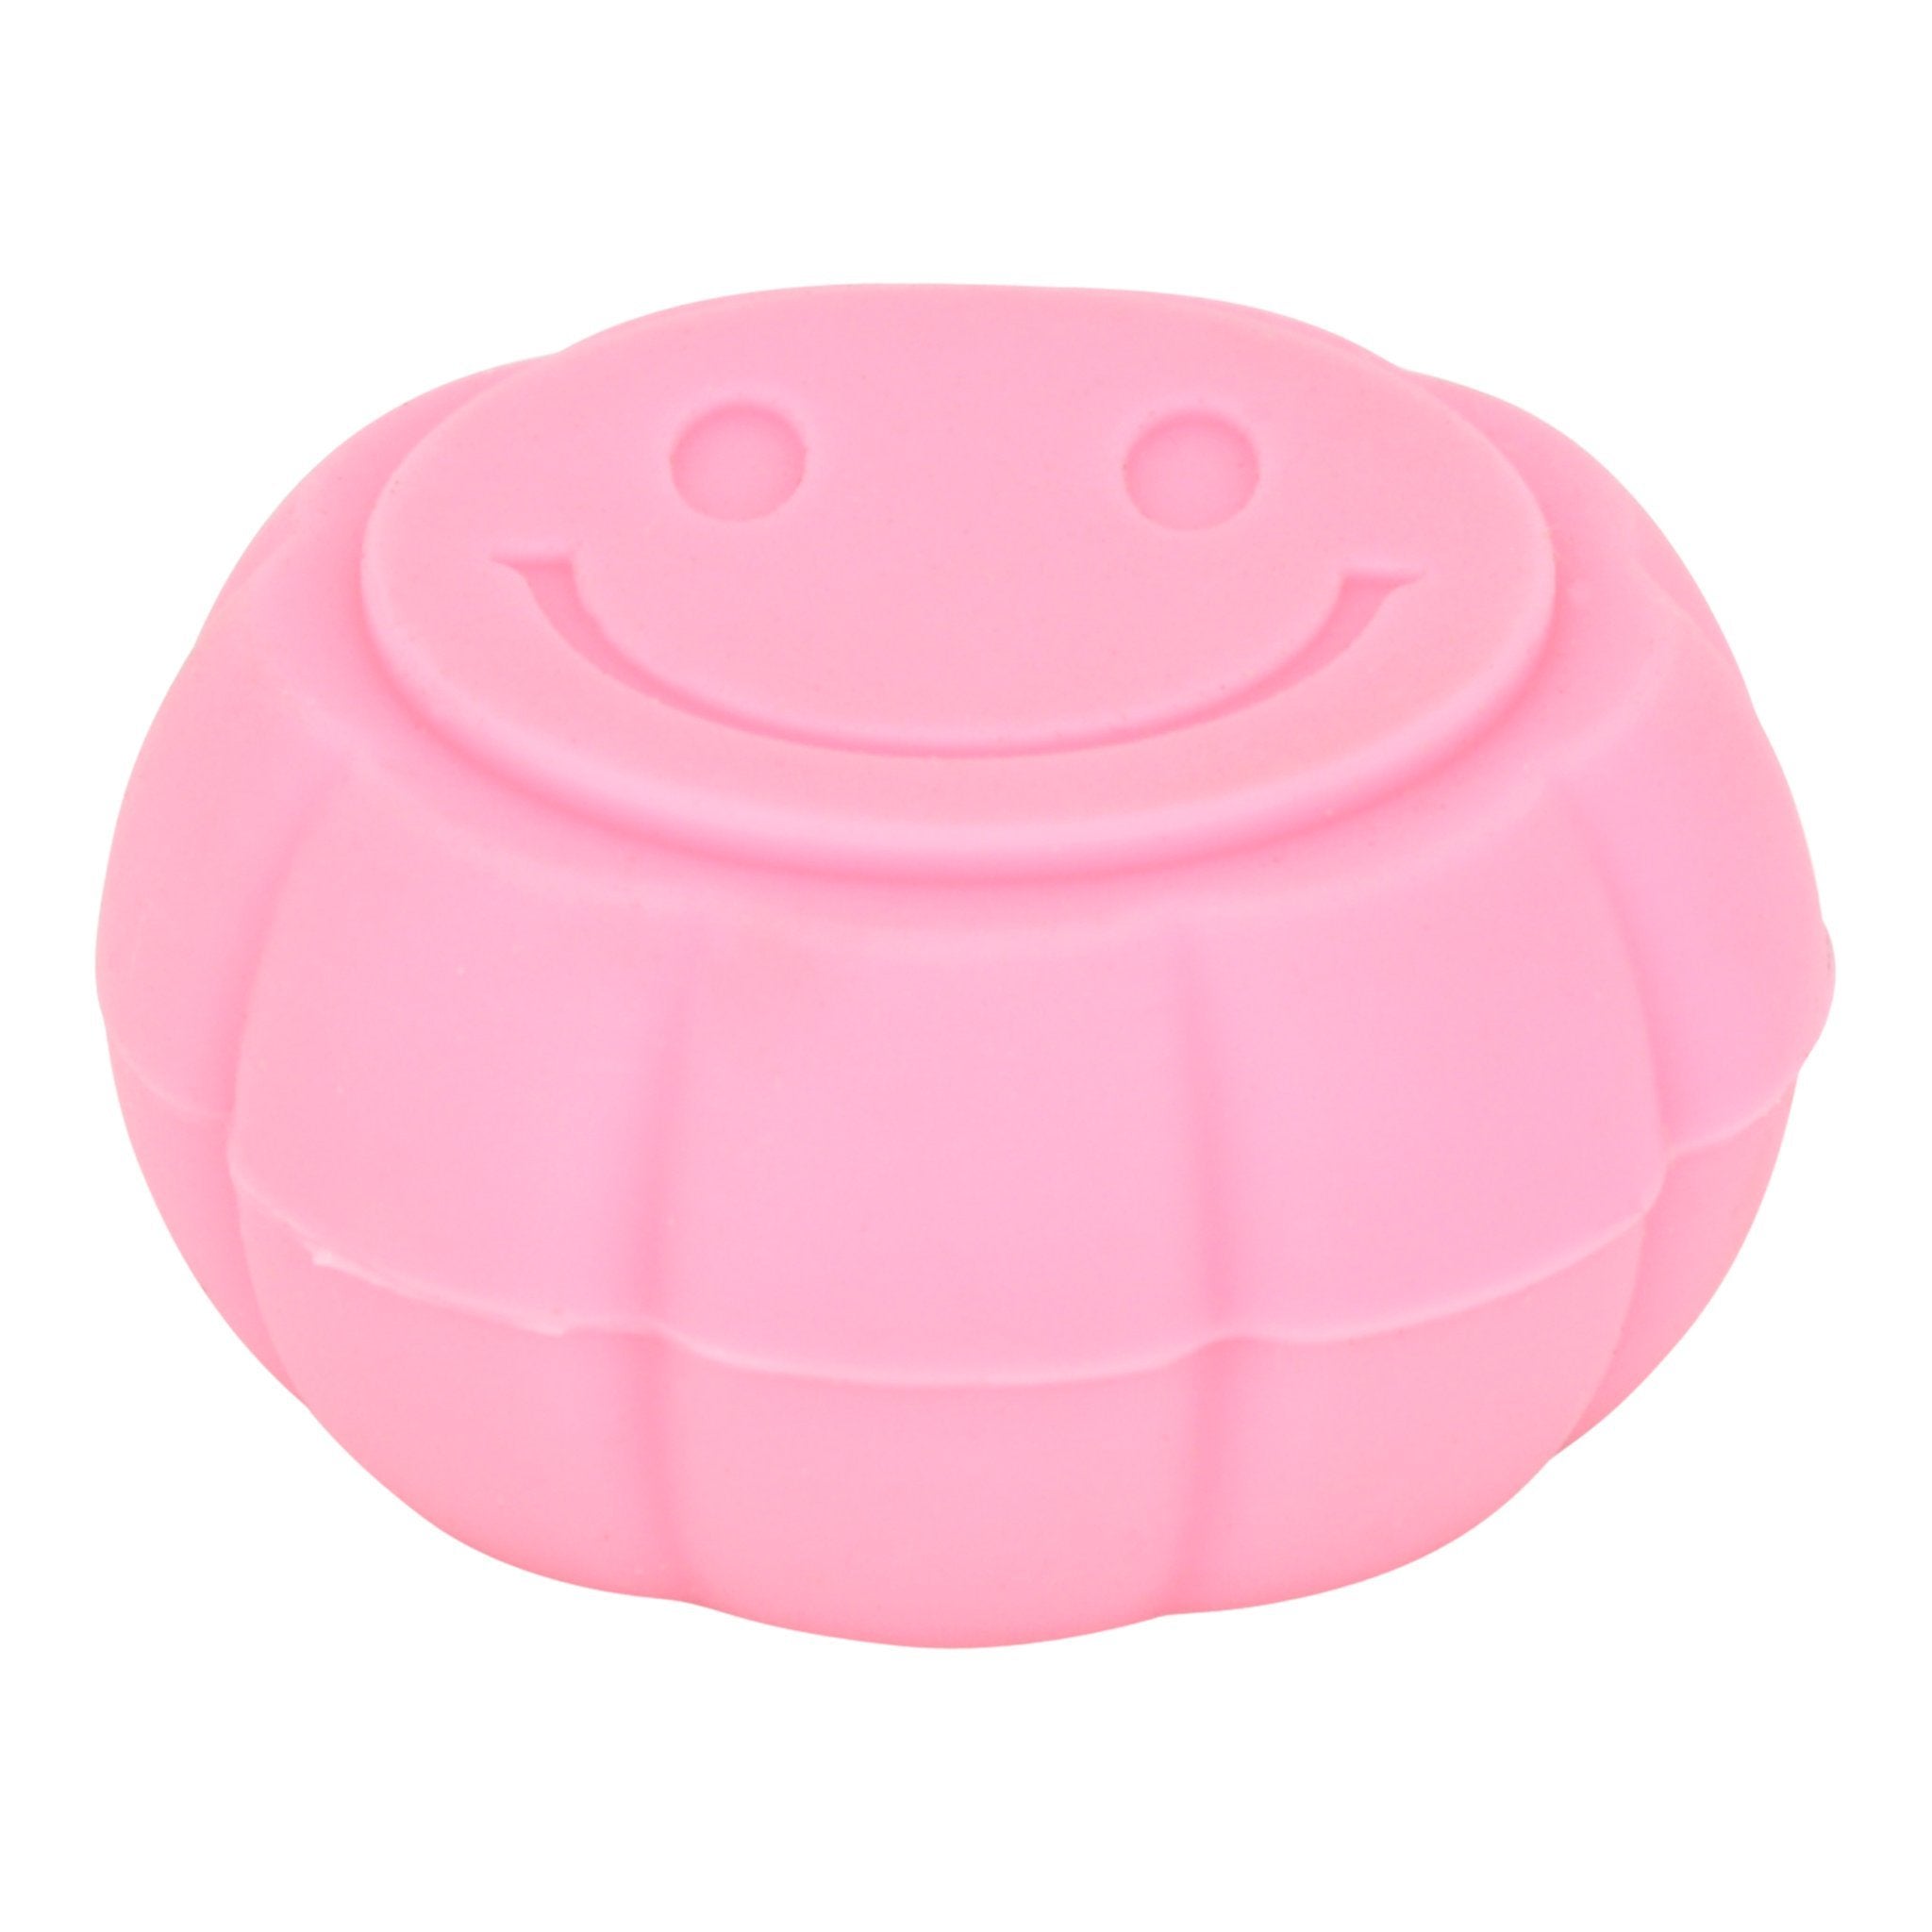 High angle and front shot of pink round silicone container smoking accessory with smiley design on lid
